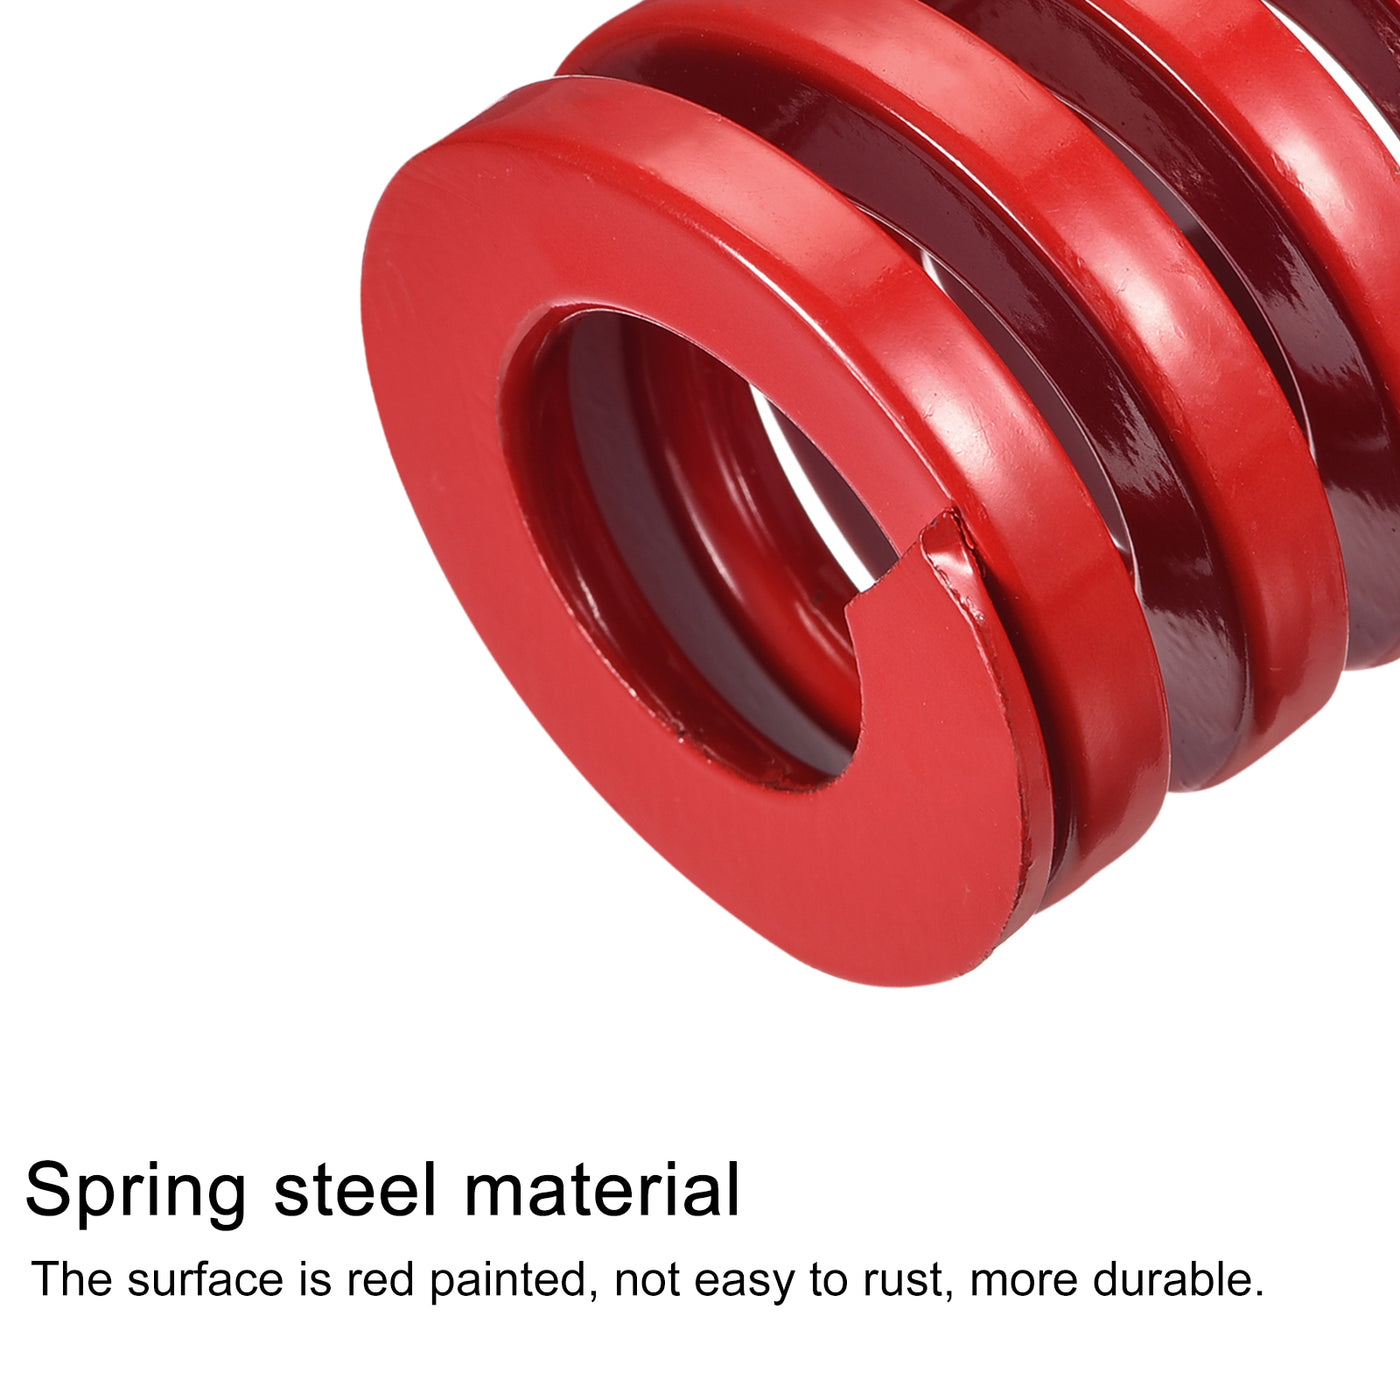 uxcell Uxcell Die Spring, 2pcs 40mm OD 60mm Long Spiral Stamping Medium Load Compression, Red